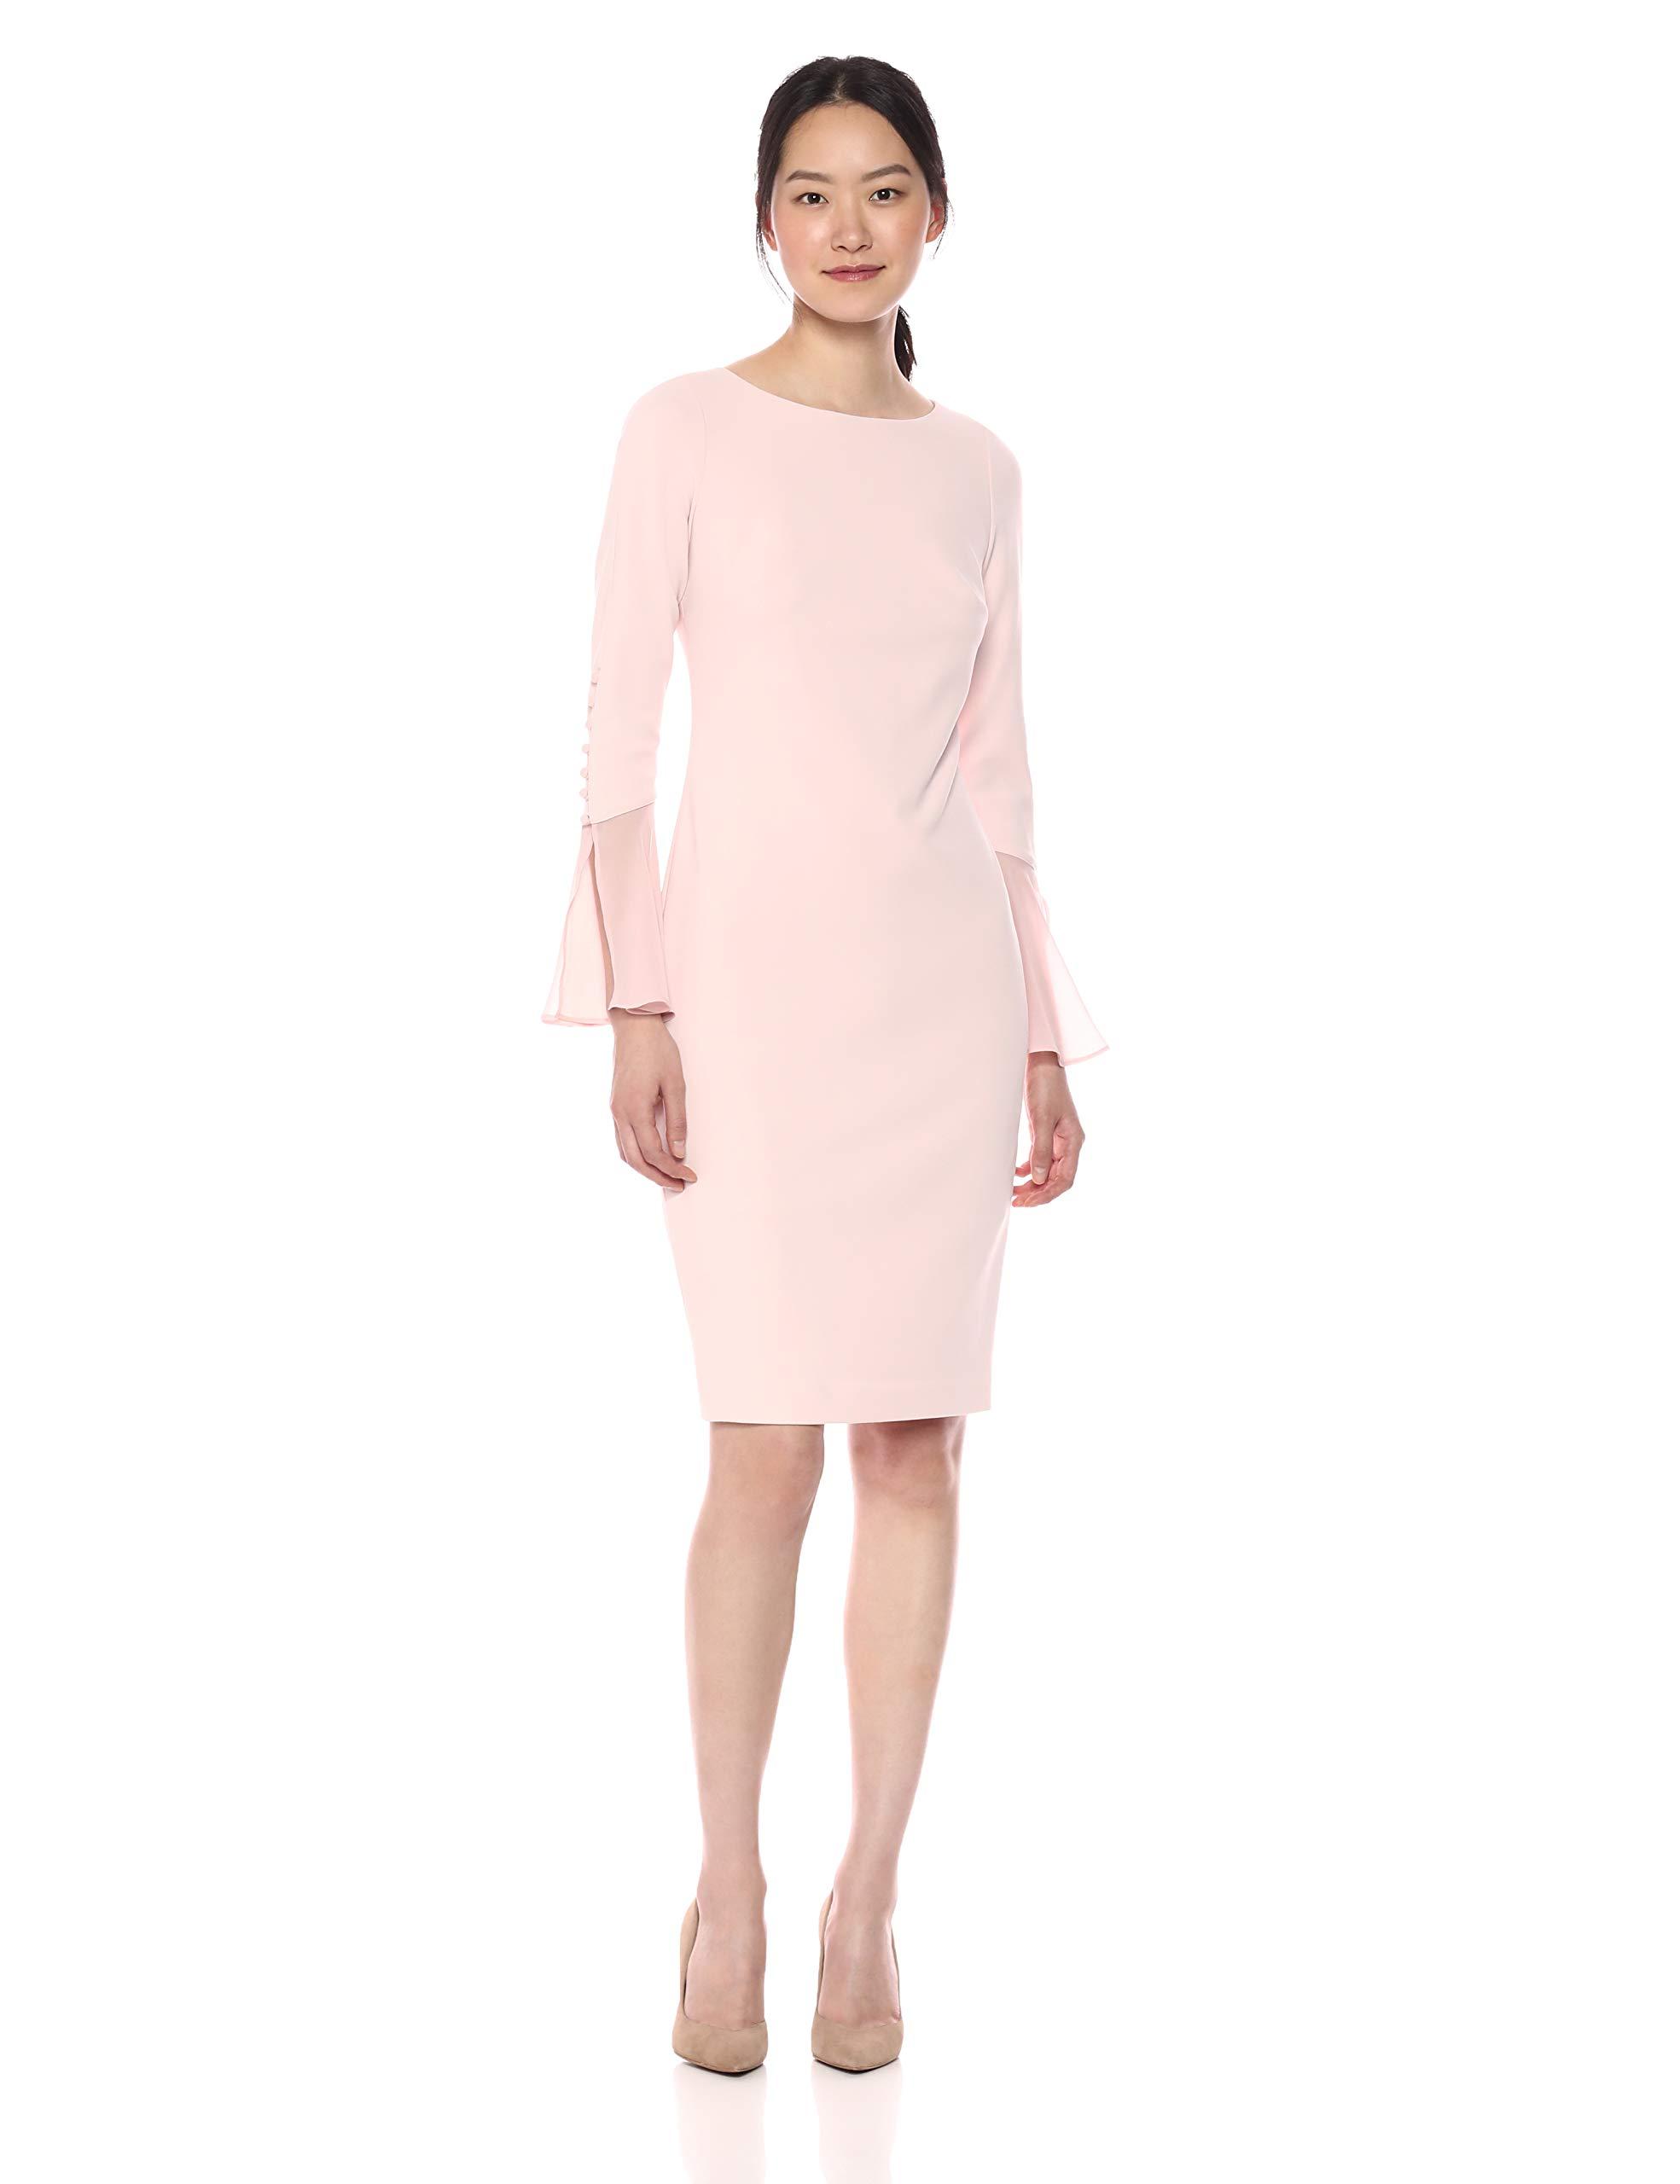 Calvin Klein Solid Sheath With Chiffon Bell Sleeves Dress in Pink | Lyst